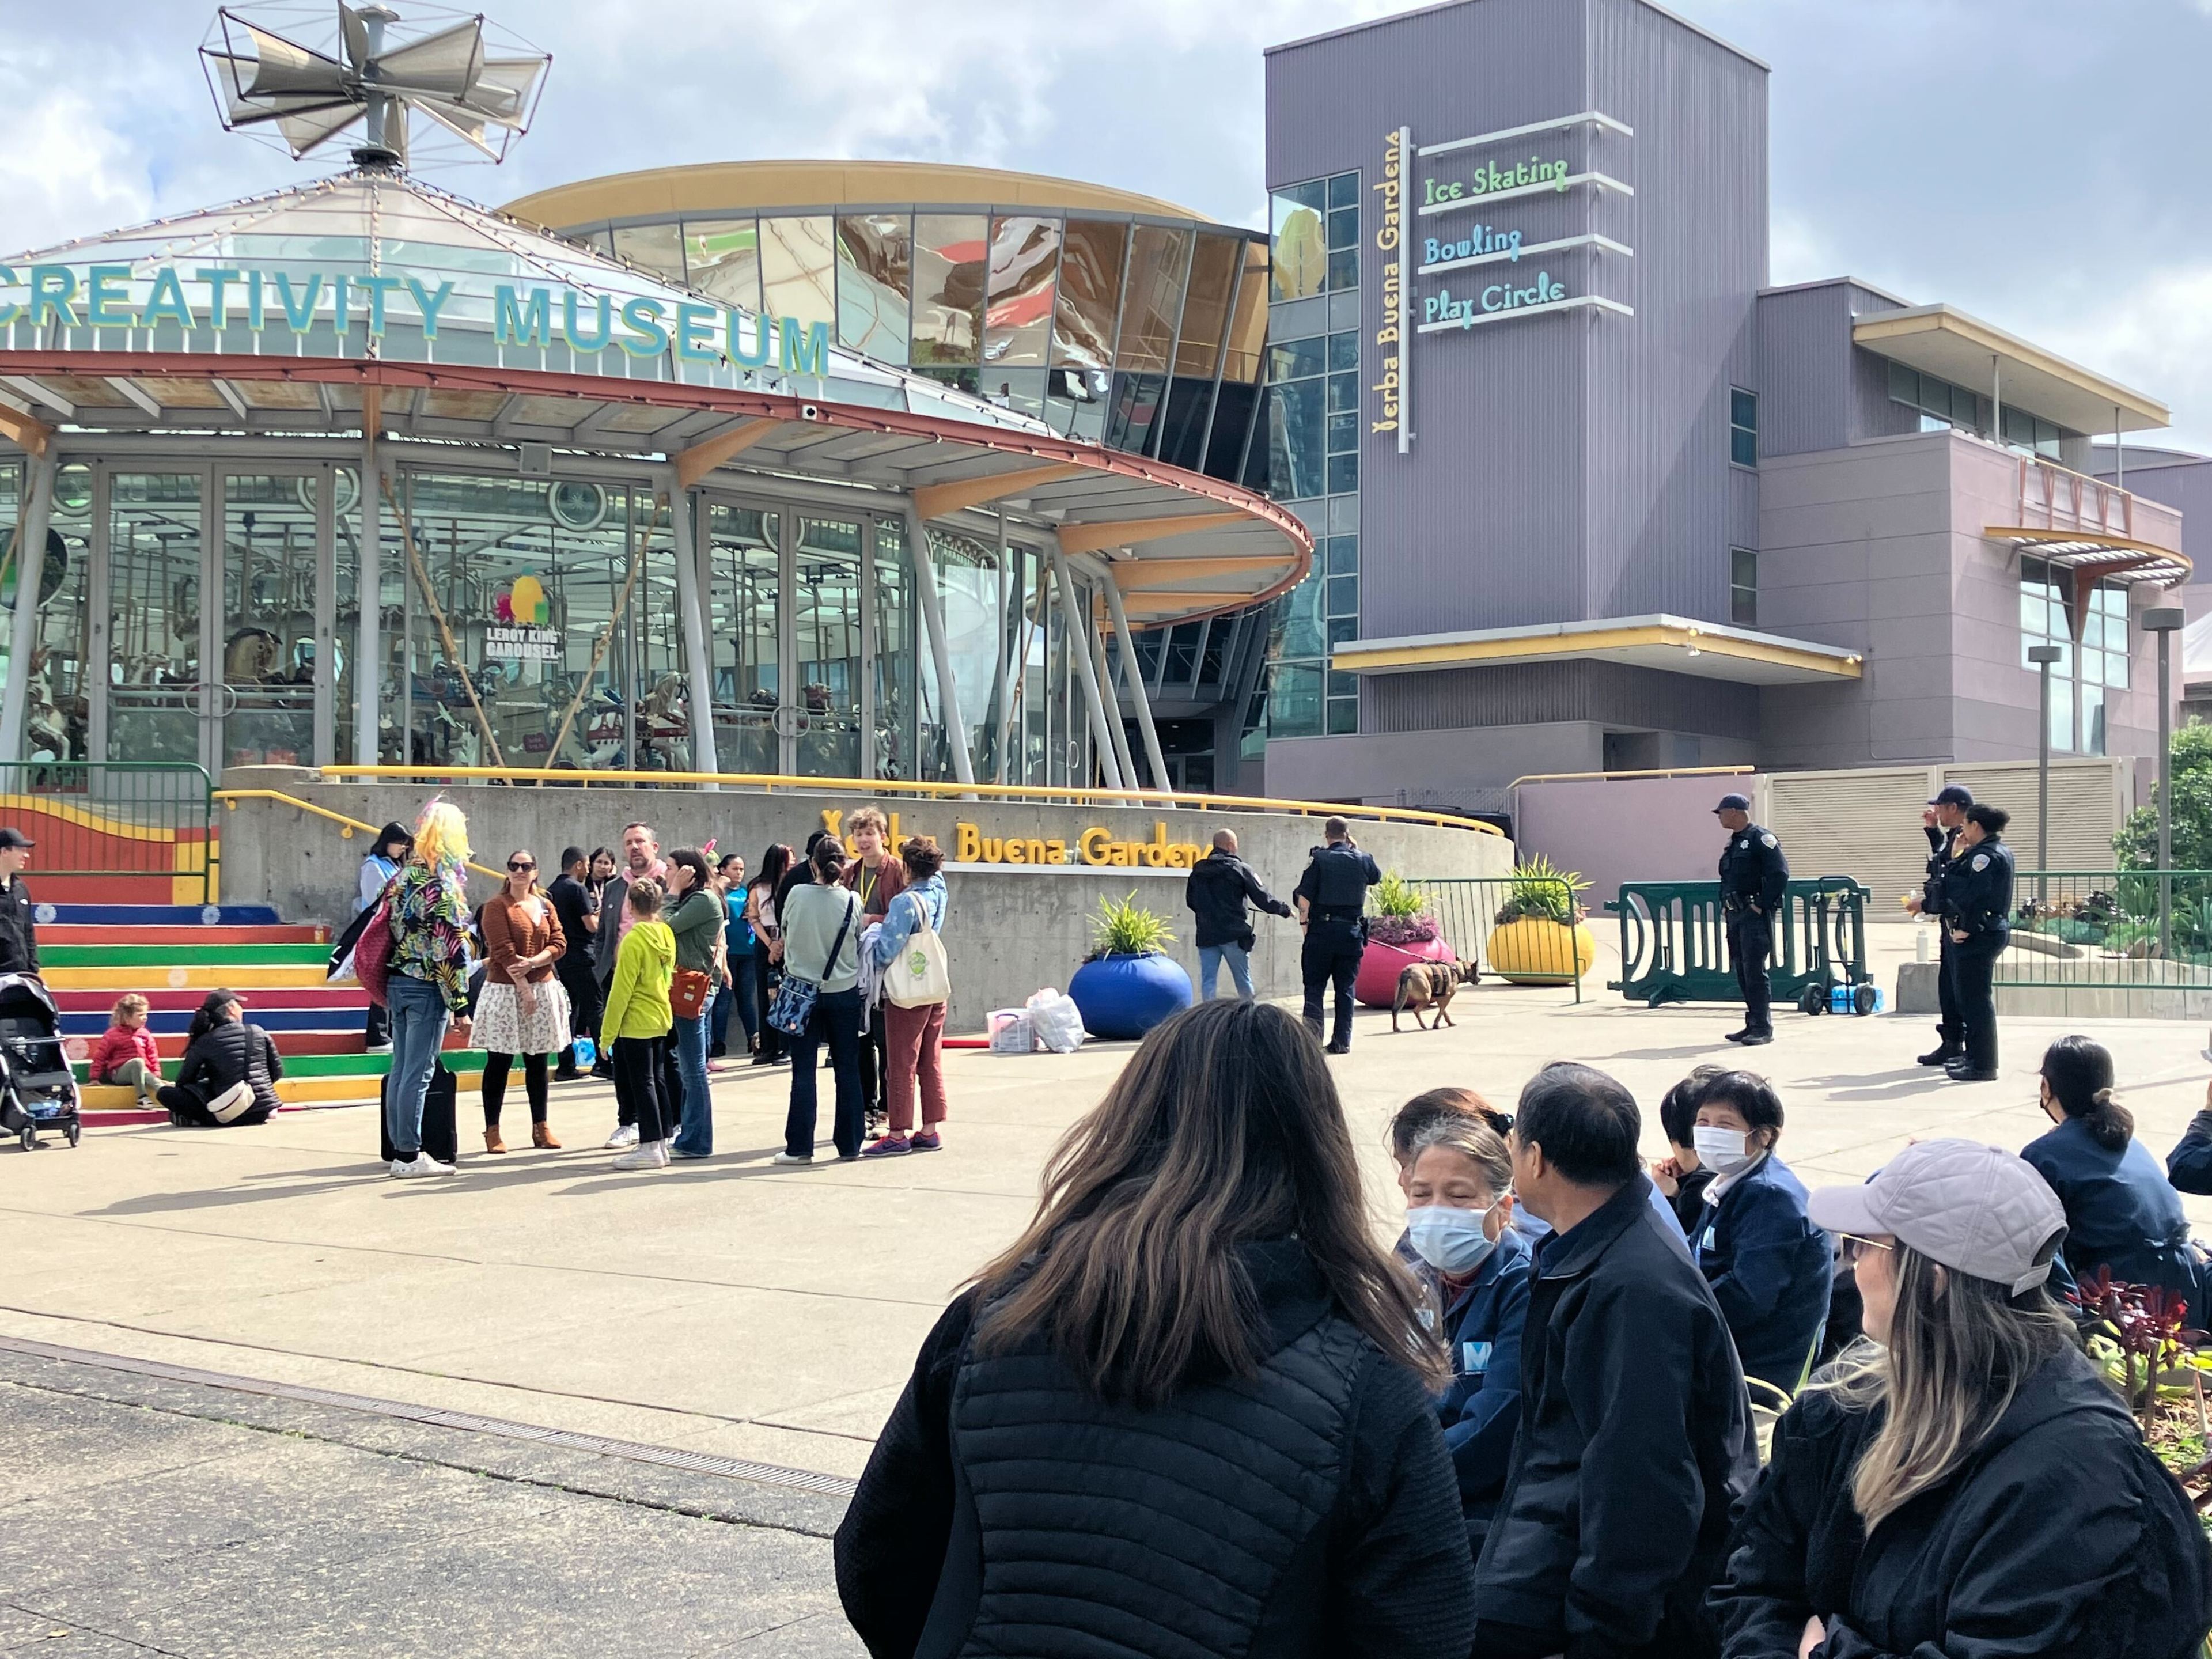 A crowd gathers outside the "Creativity Museum," with police officers nearby, under a partly cloudy sky.